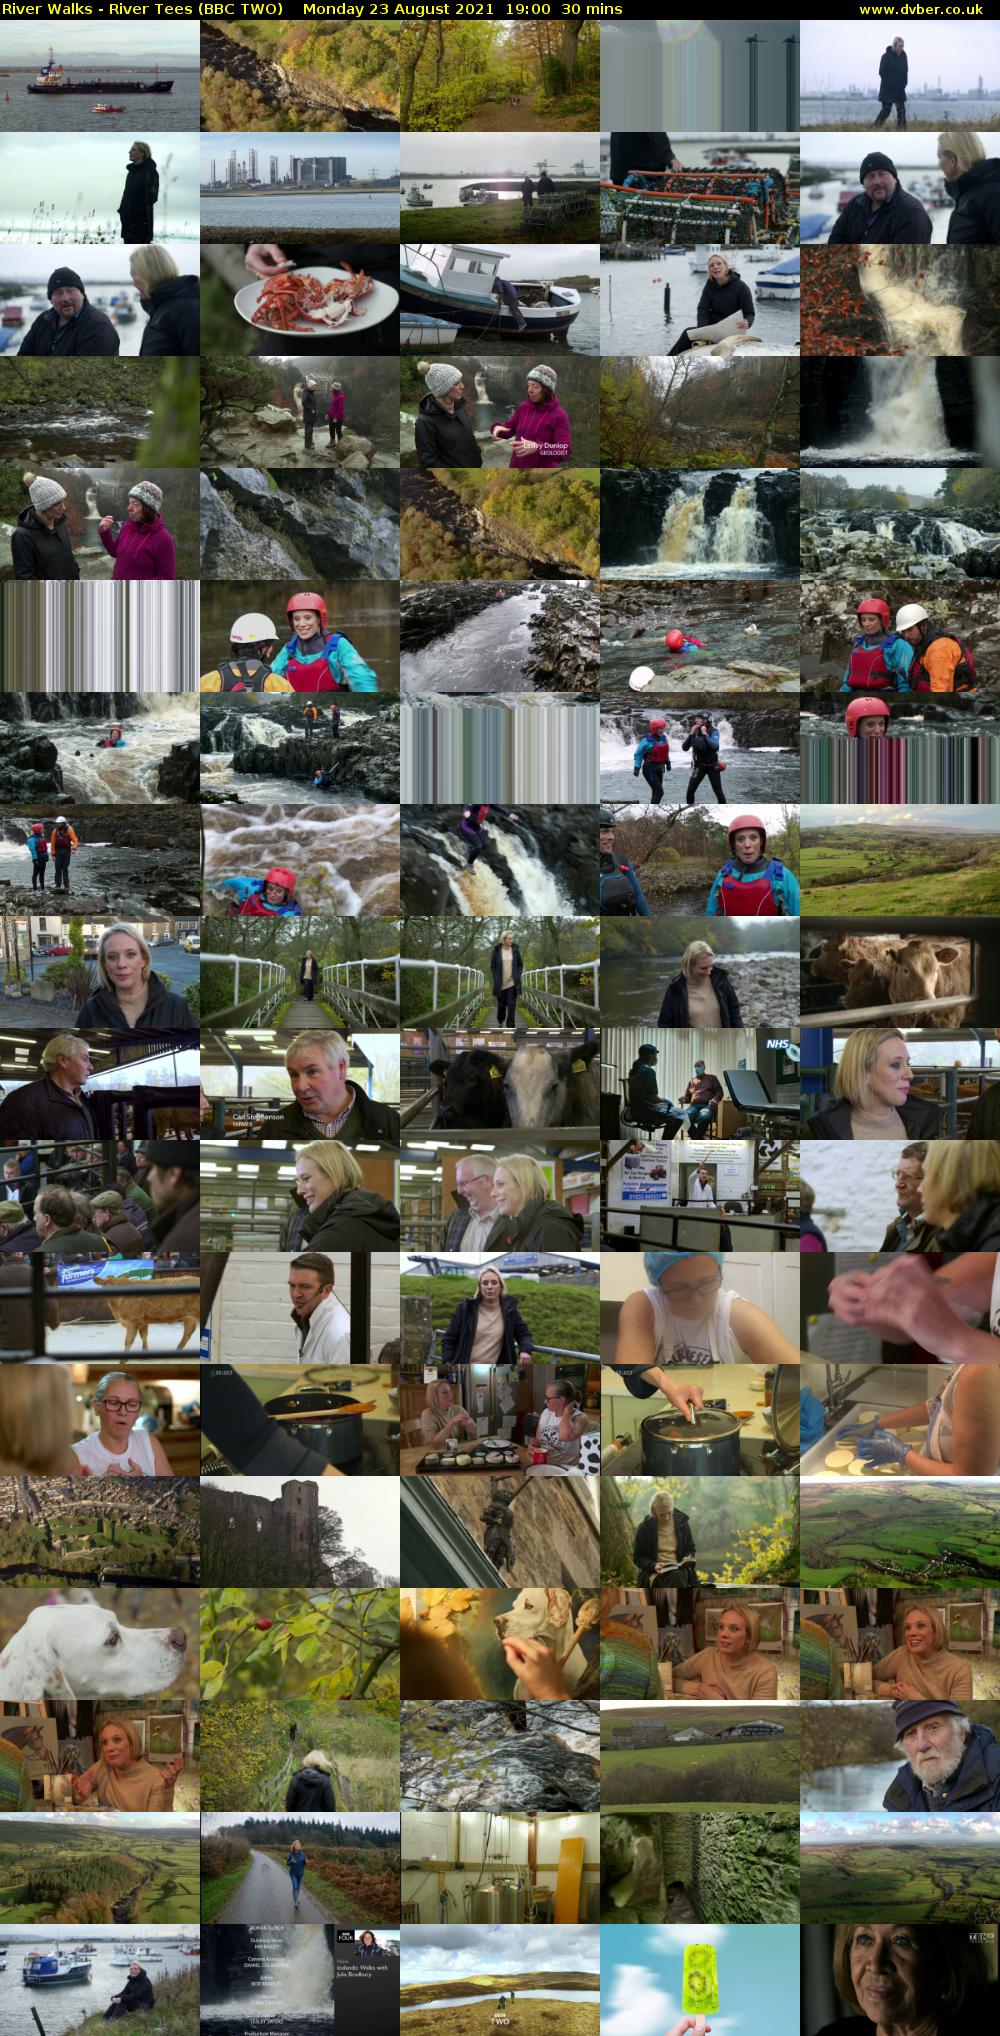 River Walks - River Tees (BBC TWO) Monday 23 August 2021 19:00 - 19:30